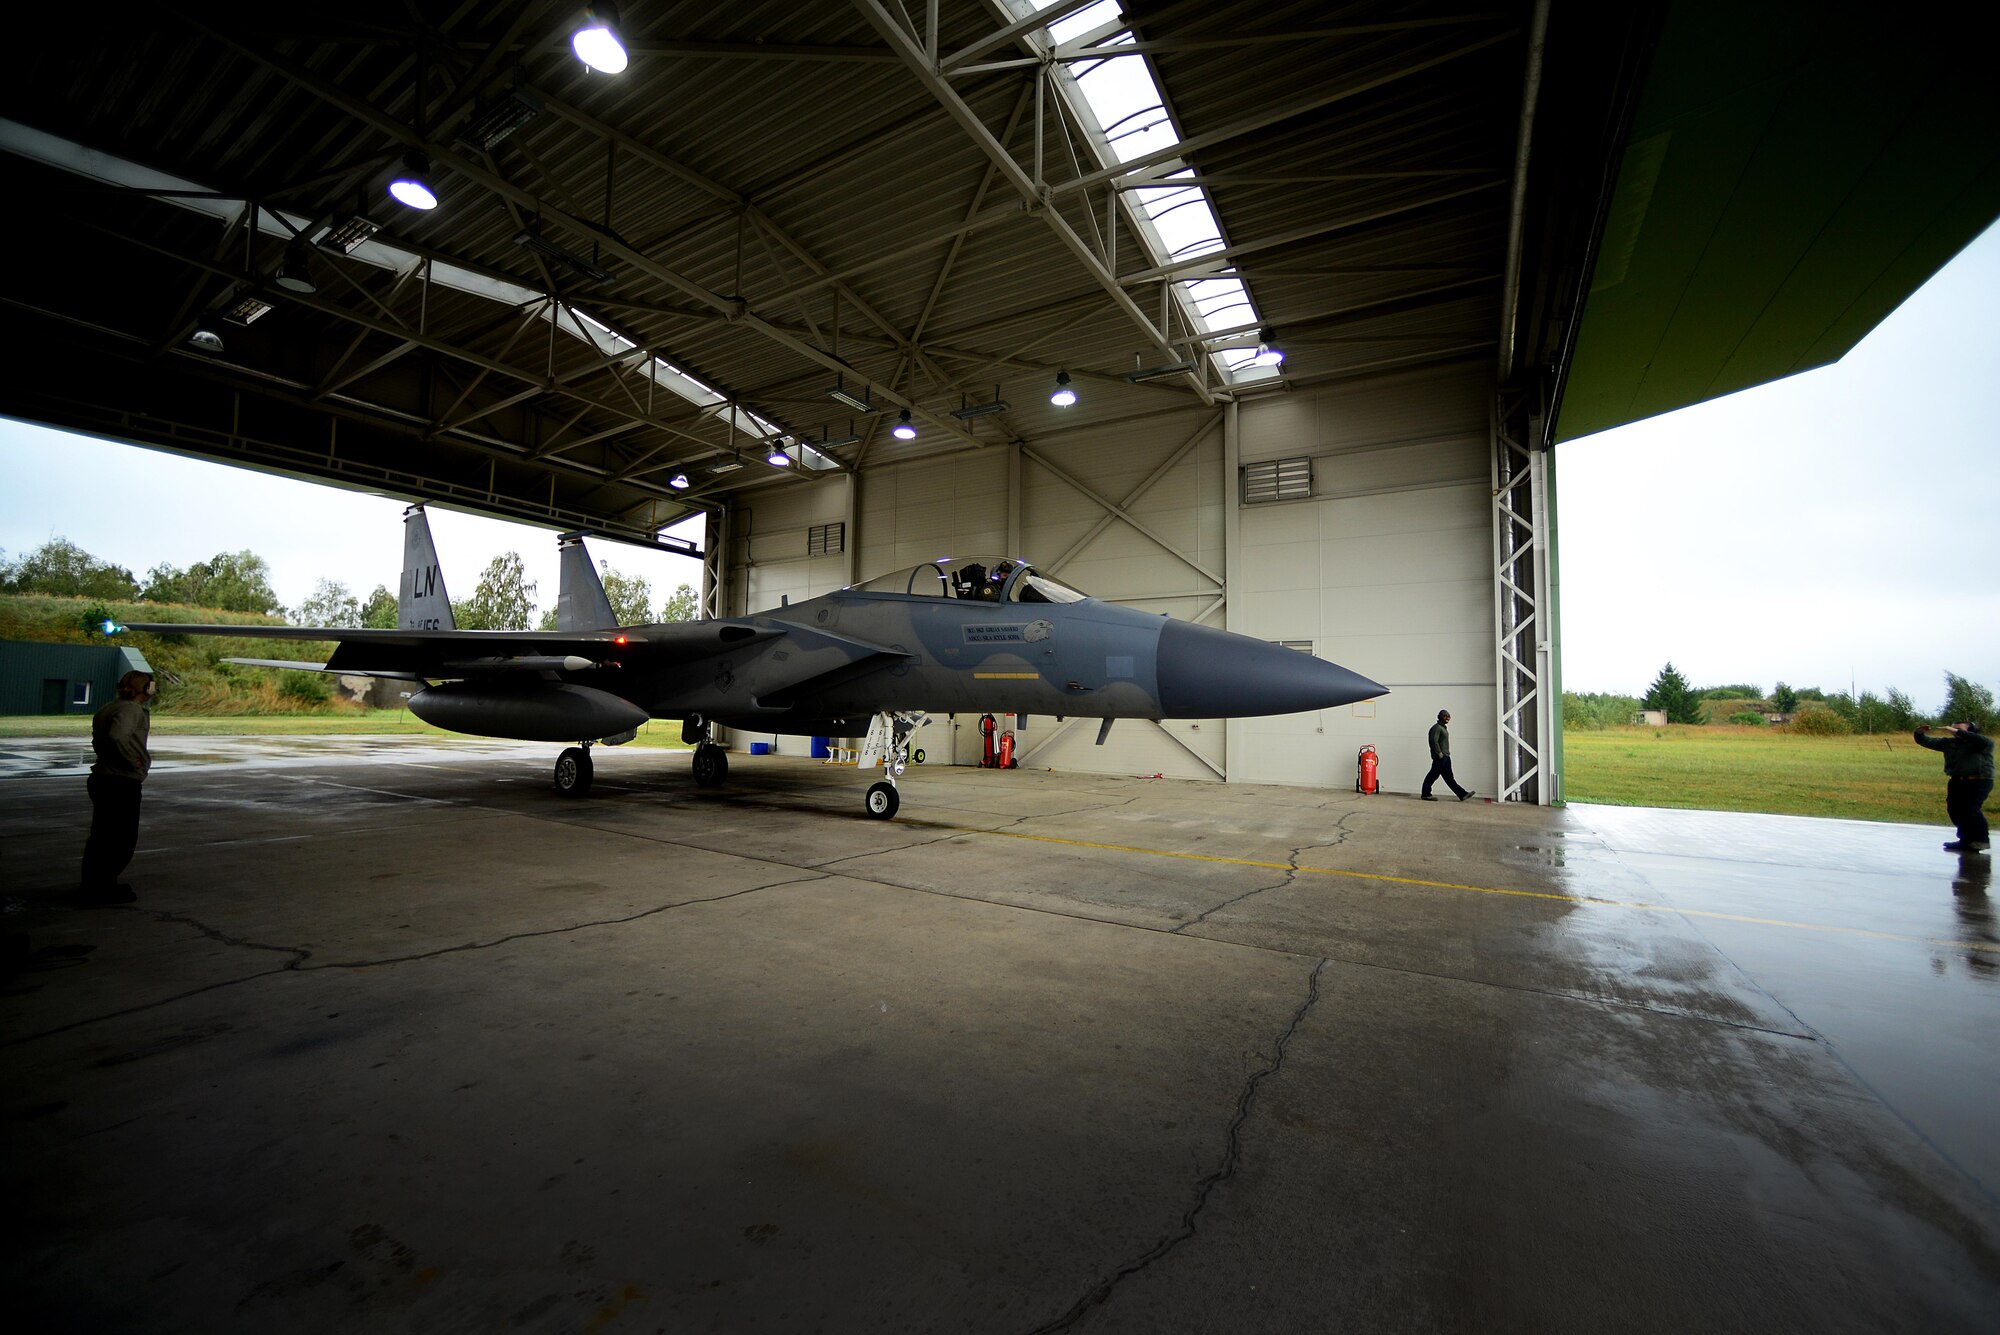 A U.S. Air Force F-15C Eagle aircrew members from the 493rd Expeditionary Fighter Squadron responds to an alert scramble notification at Siauliai Air Base, Lithuania, Sept. 4, 2017. The 493rd EFS pilots routinely track, intercept and interrogate aircraft operating in Baltic airspace who are non-responsive to local air-traffic controlled communication or operating without an official flight plan. (U.S. Air Force photo/ Tech. Sgt. Matthew Plew)